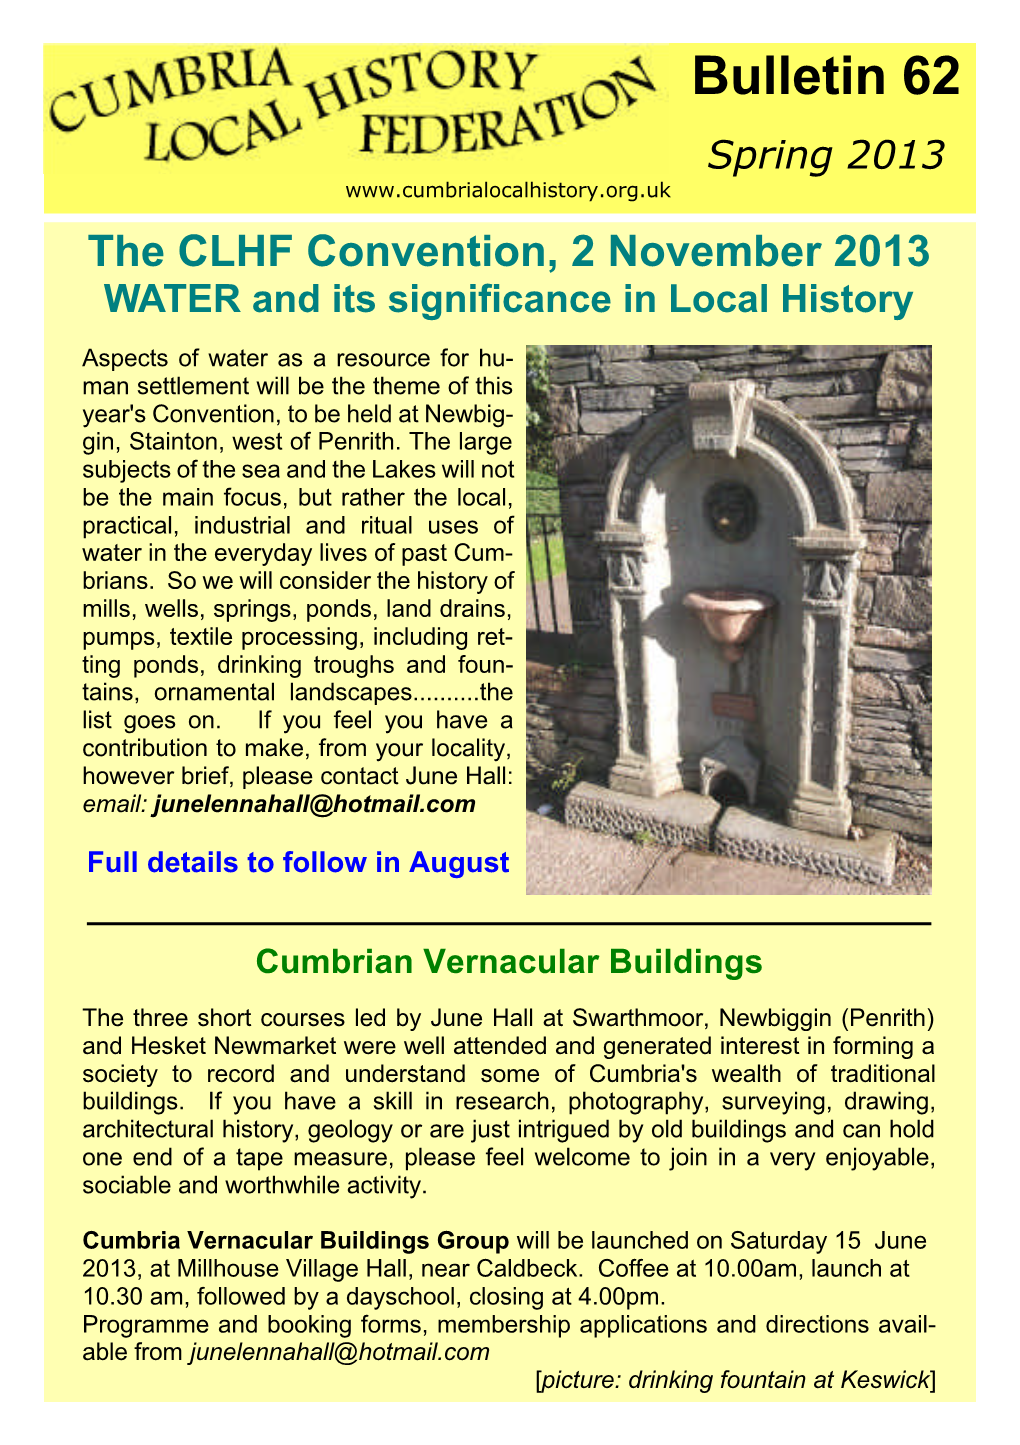 CLHF Bulletin 62, Spring 2013 Bulletin 62 Spring 2013 the CLHF Convention, 2 November 2013 WATER and Its Significance in Local History